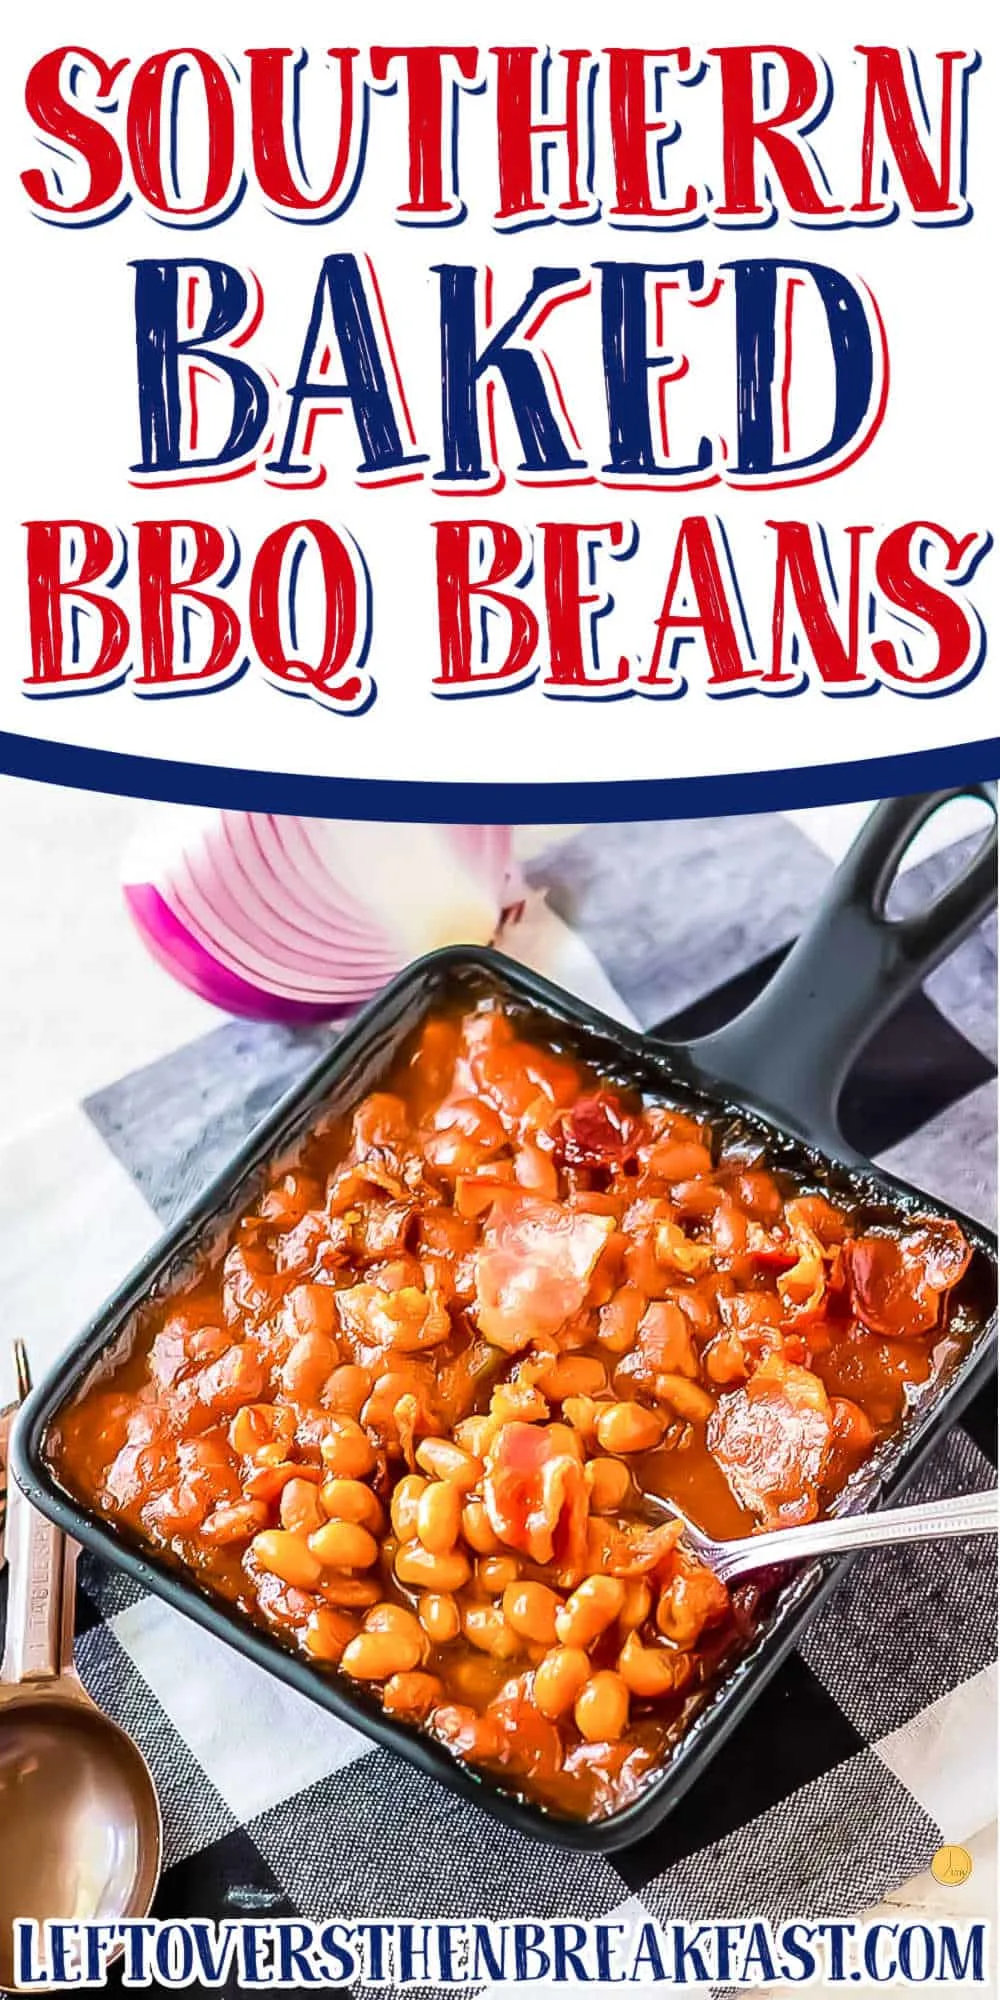 pinterest collage of baked beans with text "southern baked beans"